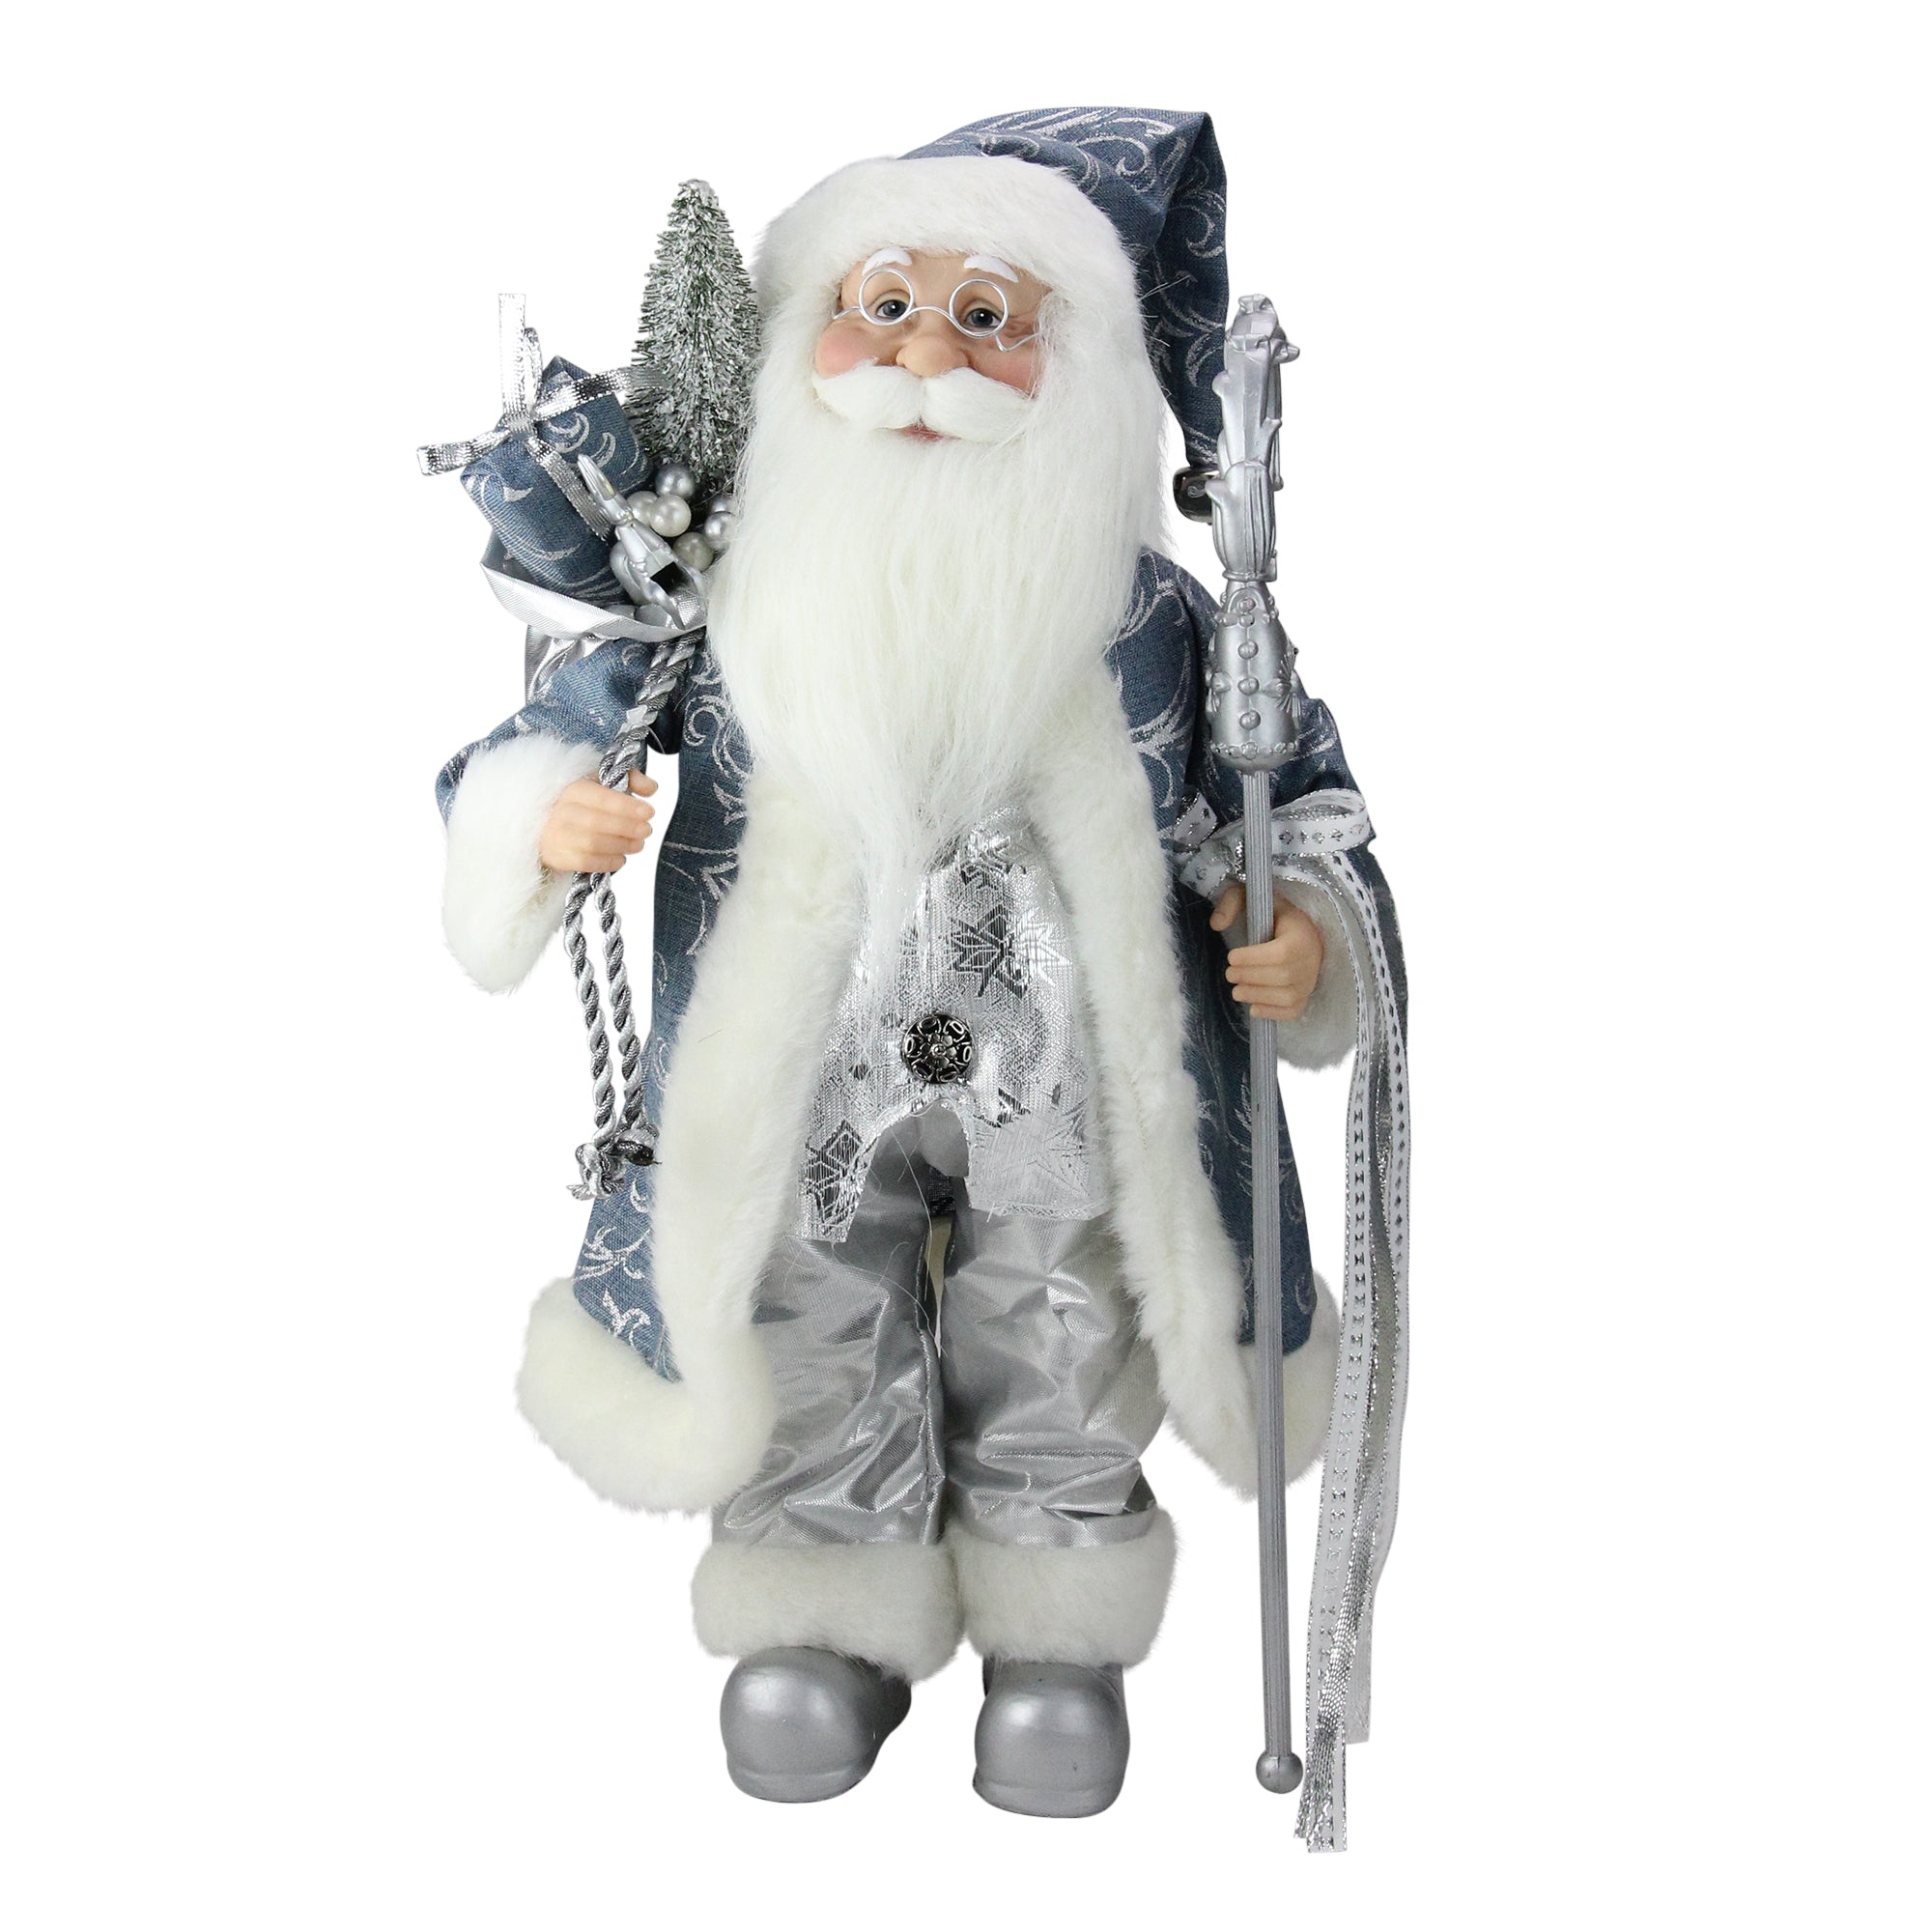 16" Ice Palace Standing Santa Claus in Blue and Silver Holding A Staff and Bag Christmas Figure